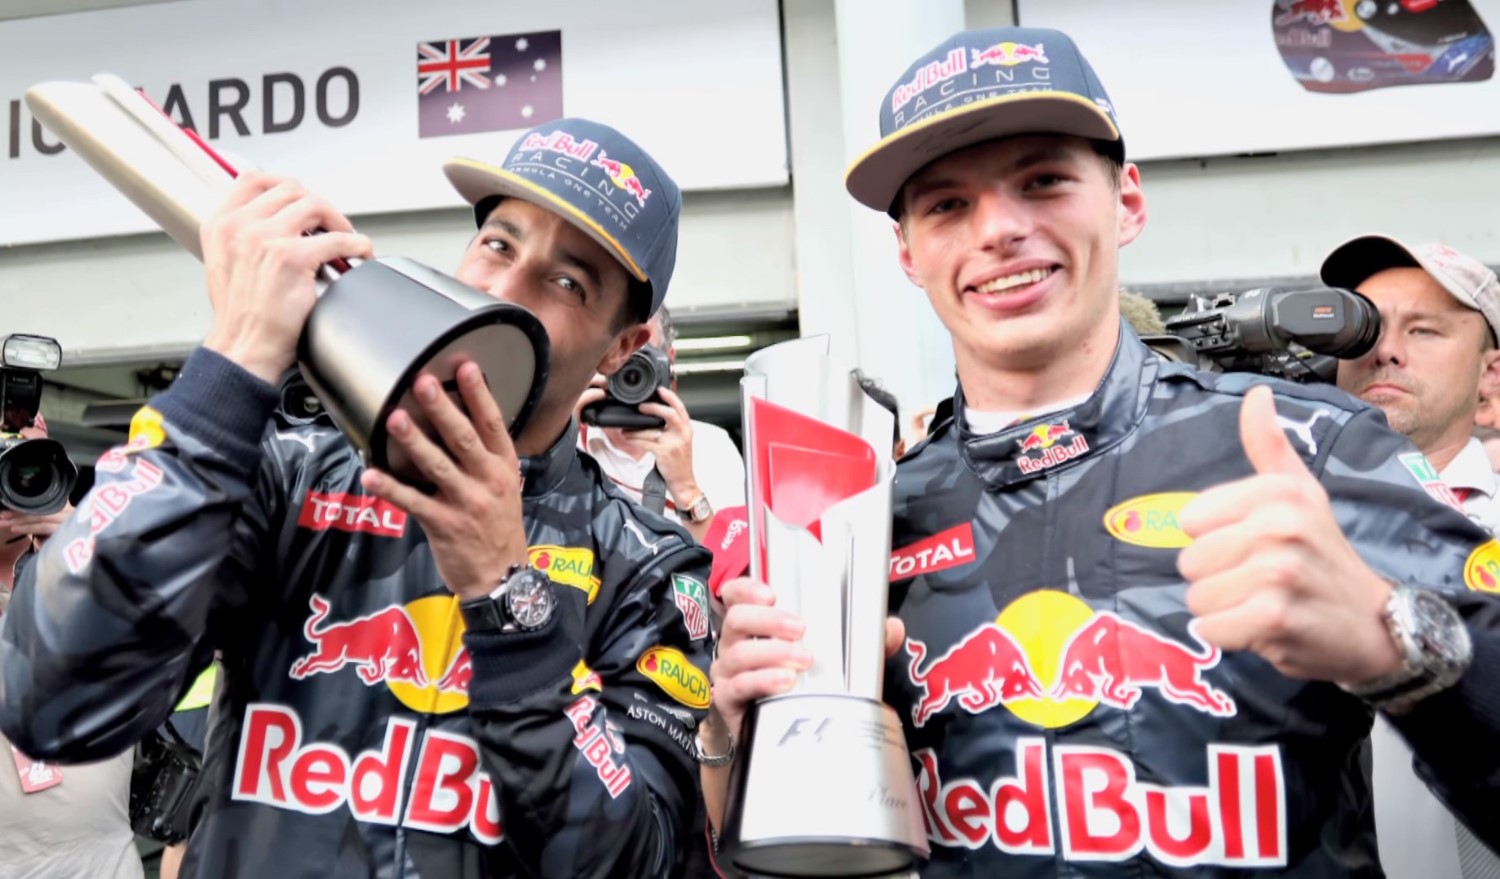 Ricciardo and Verstappen know there will be nowhere to go in 2019 and will stay at Red Bull